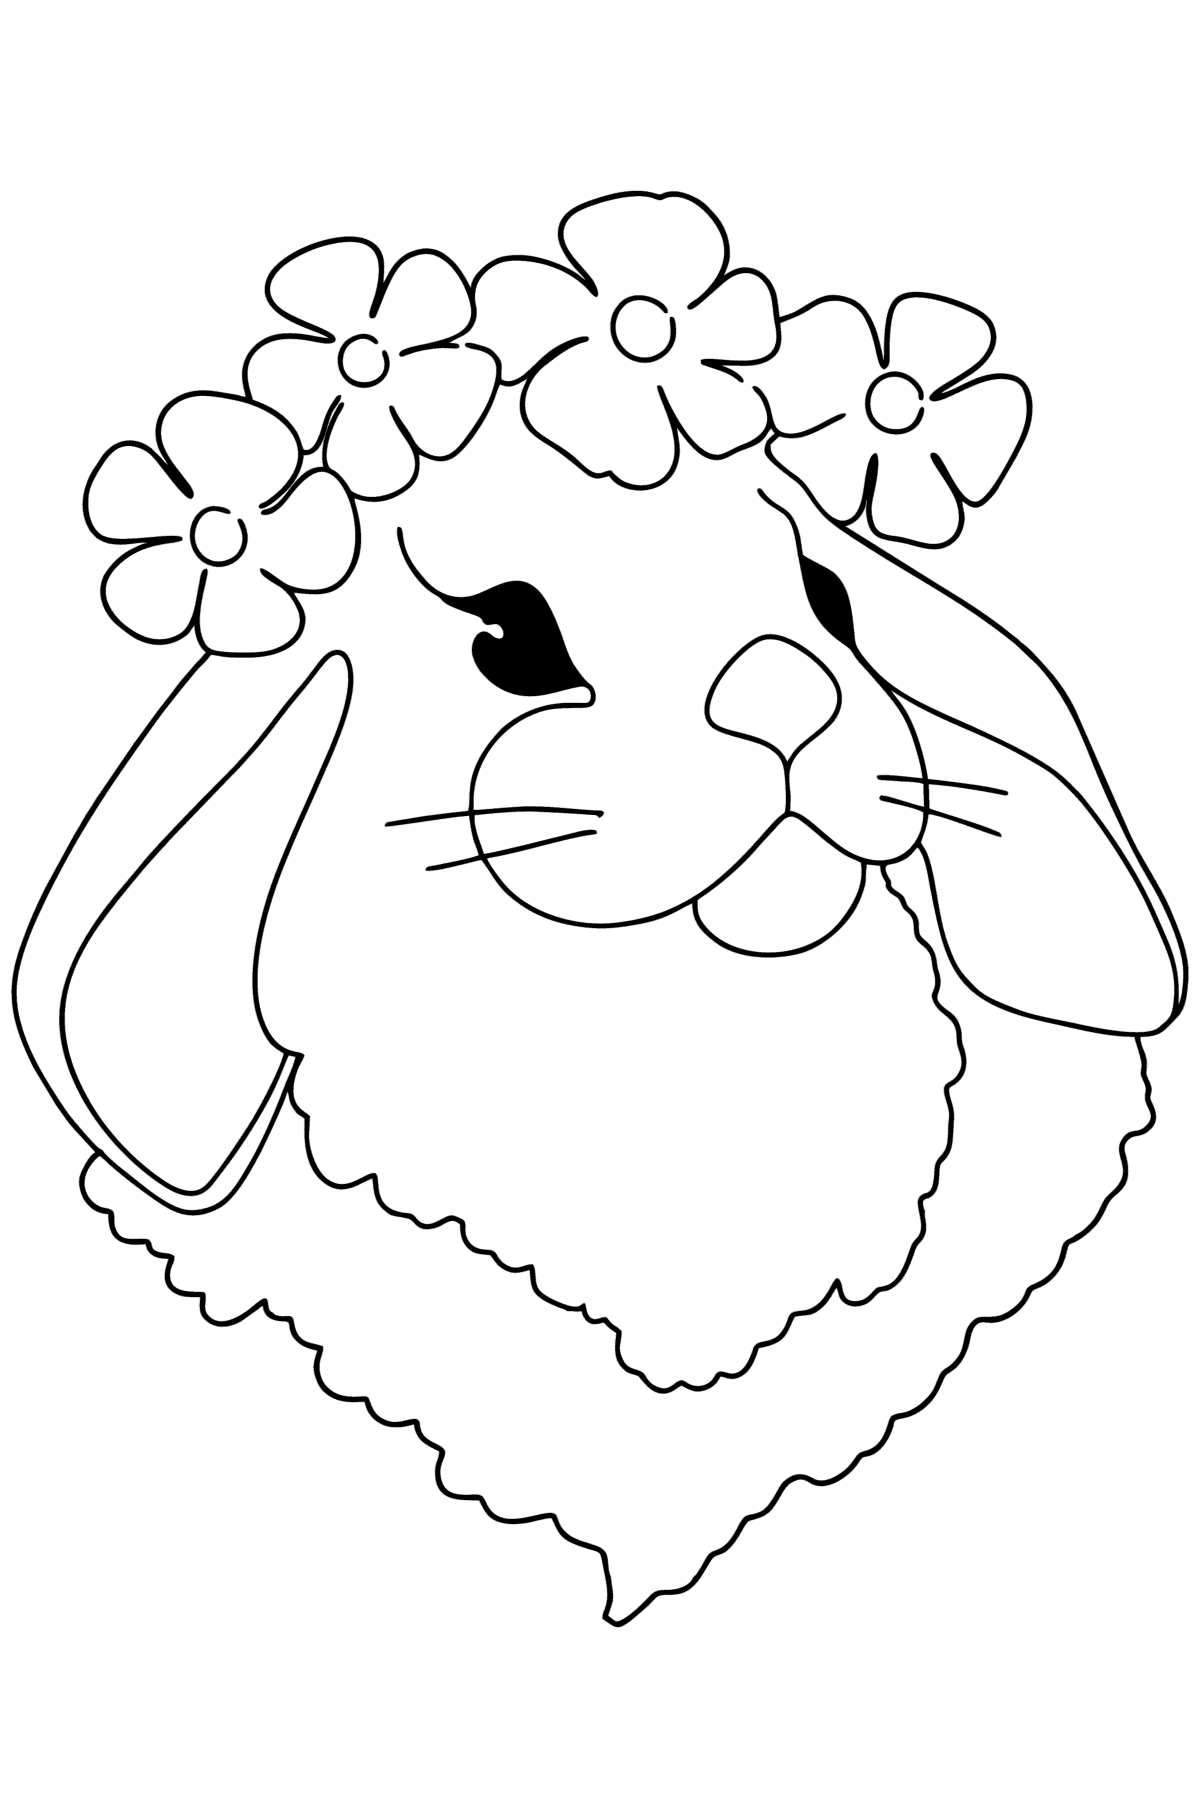 Hare Face coloring page - Coloring Pages for Kids